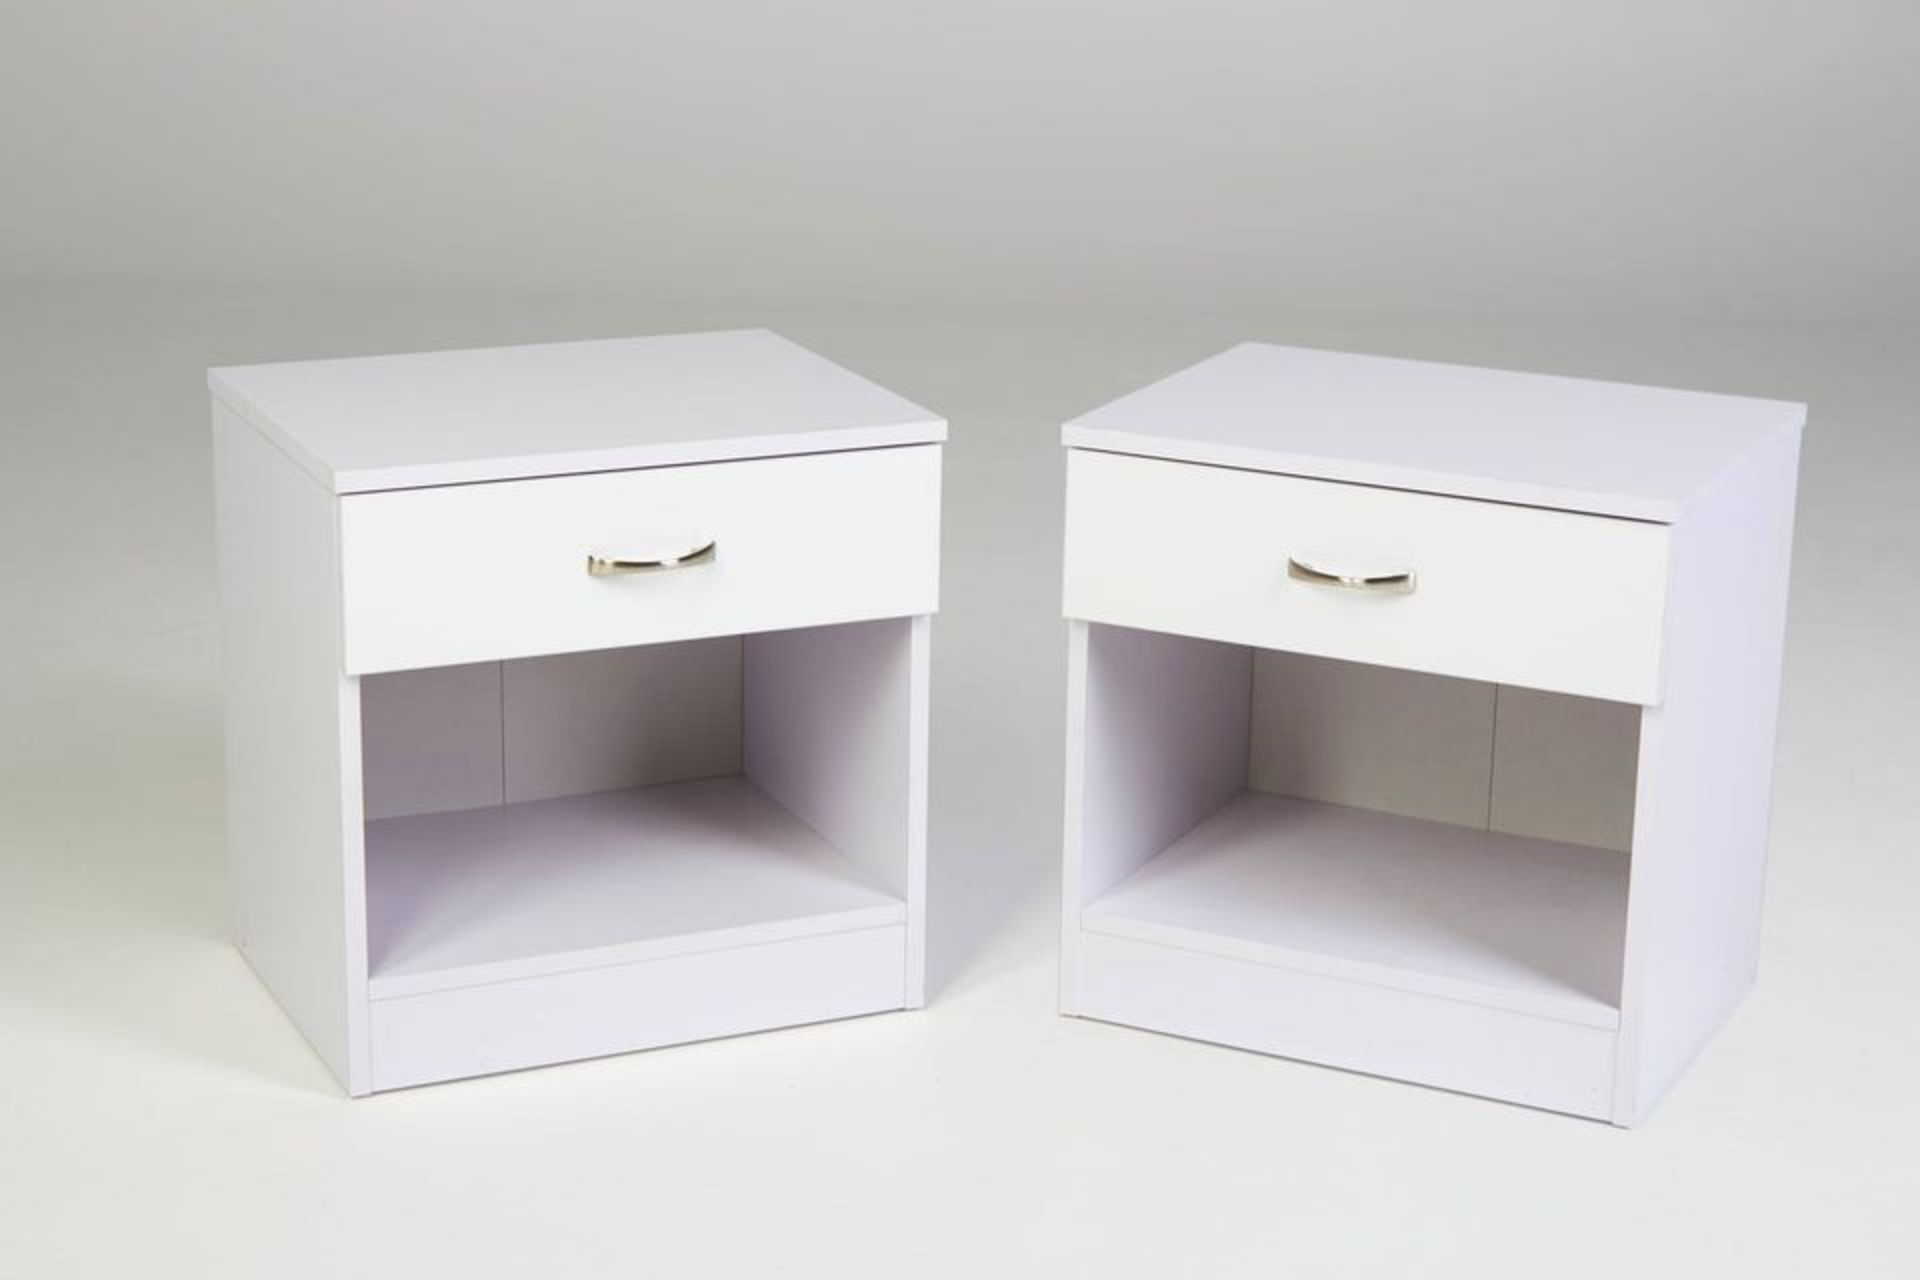 20 X WHITE SINGLE DRAWER BEDSIDES WITH HIGH GLOSS DRAWER FRONTS - Image 2 of 4